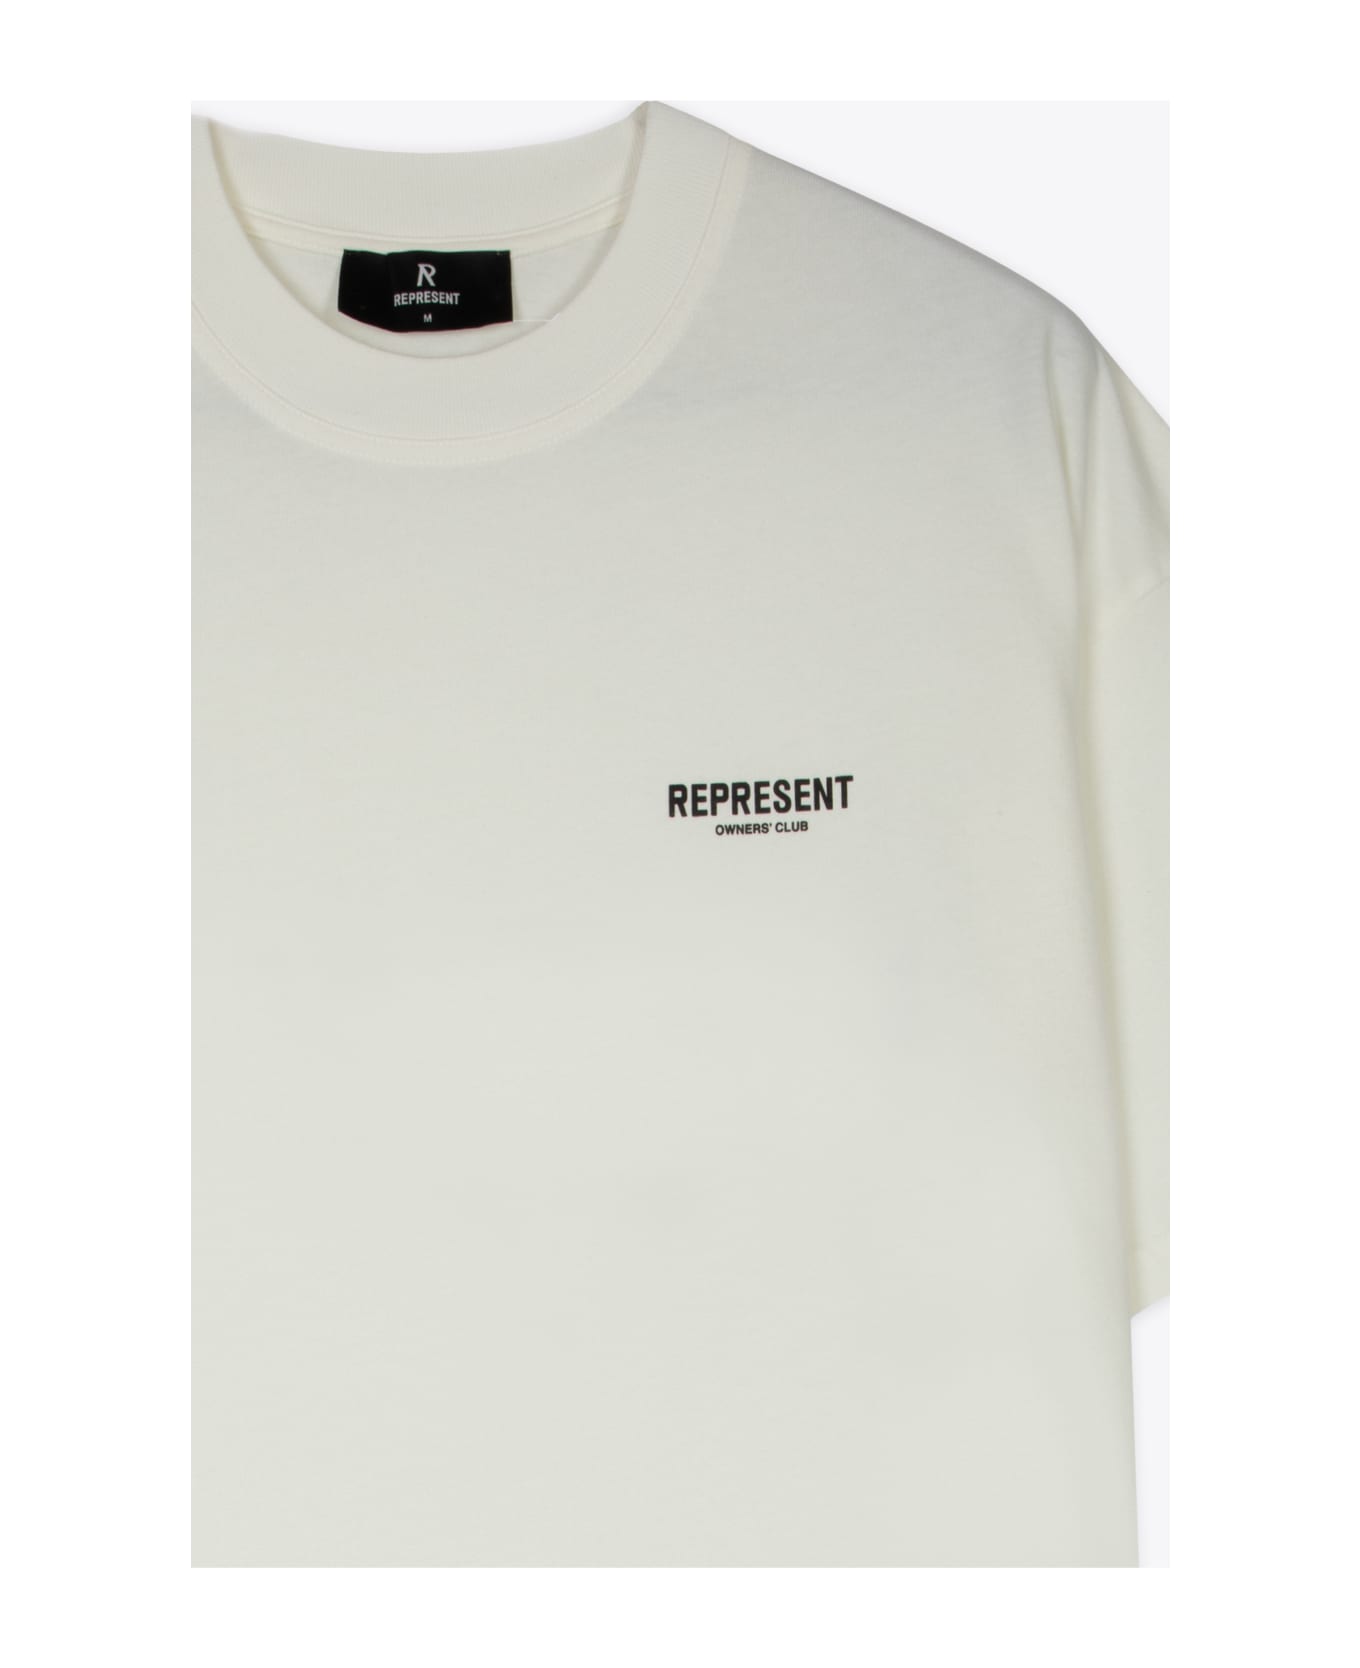 REPRESENT Owners Club T-shirt White cotton t-shirt with logo - Owners Club T-shirt - Bianco